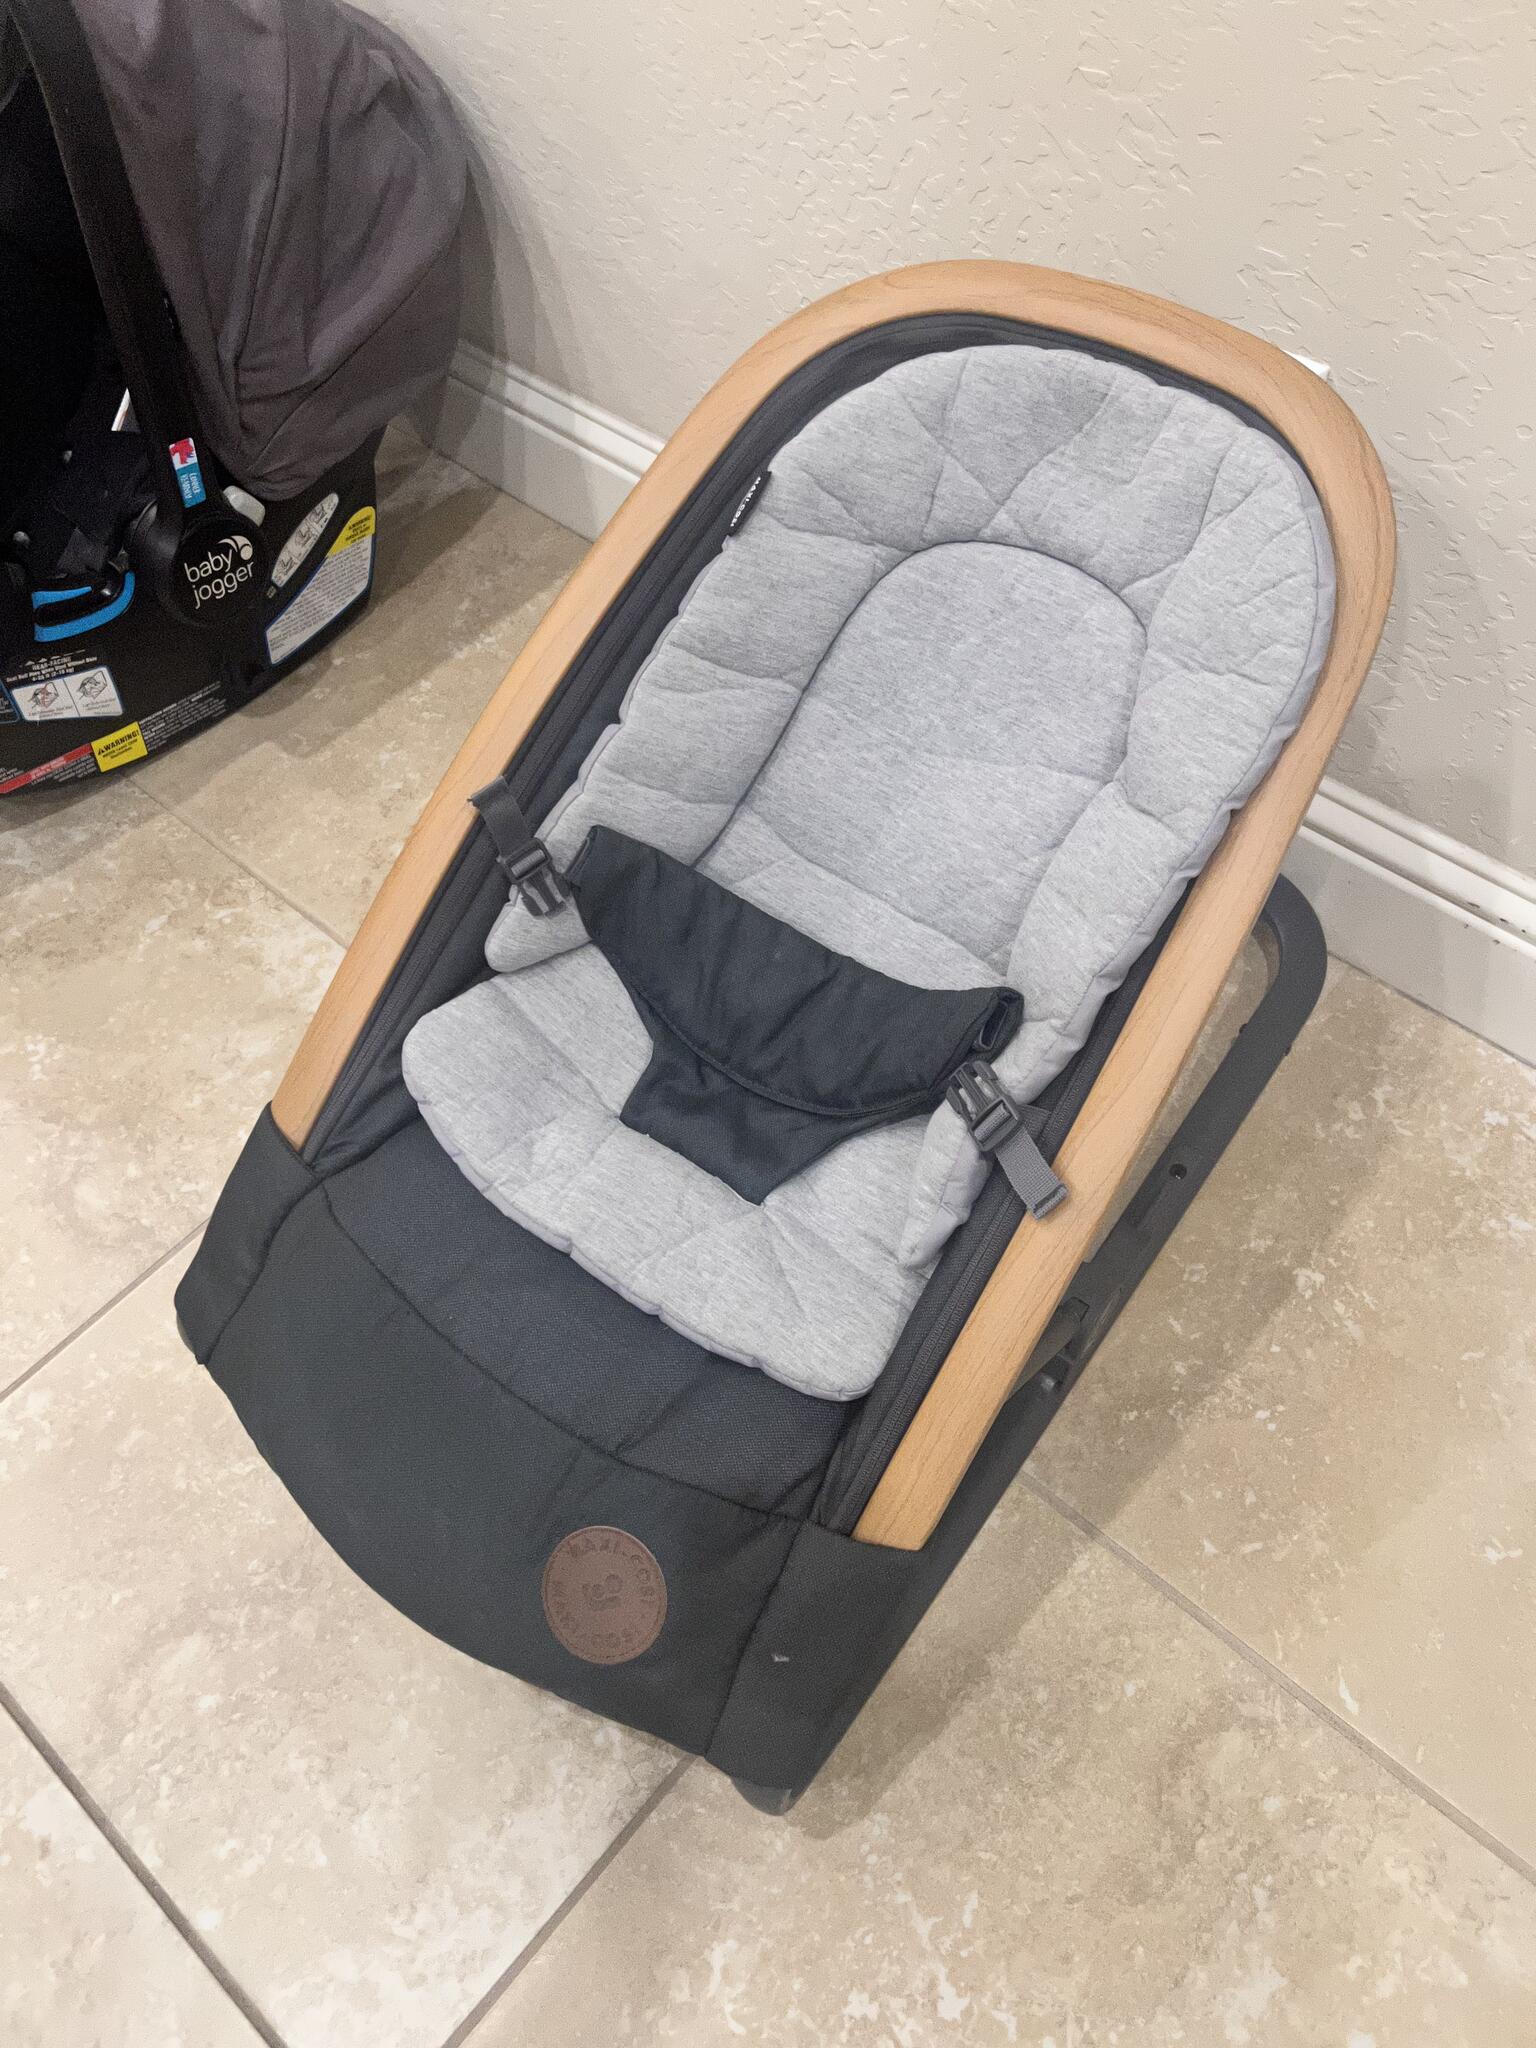 Baby items for sell! - Birdland